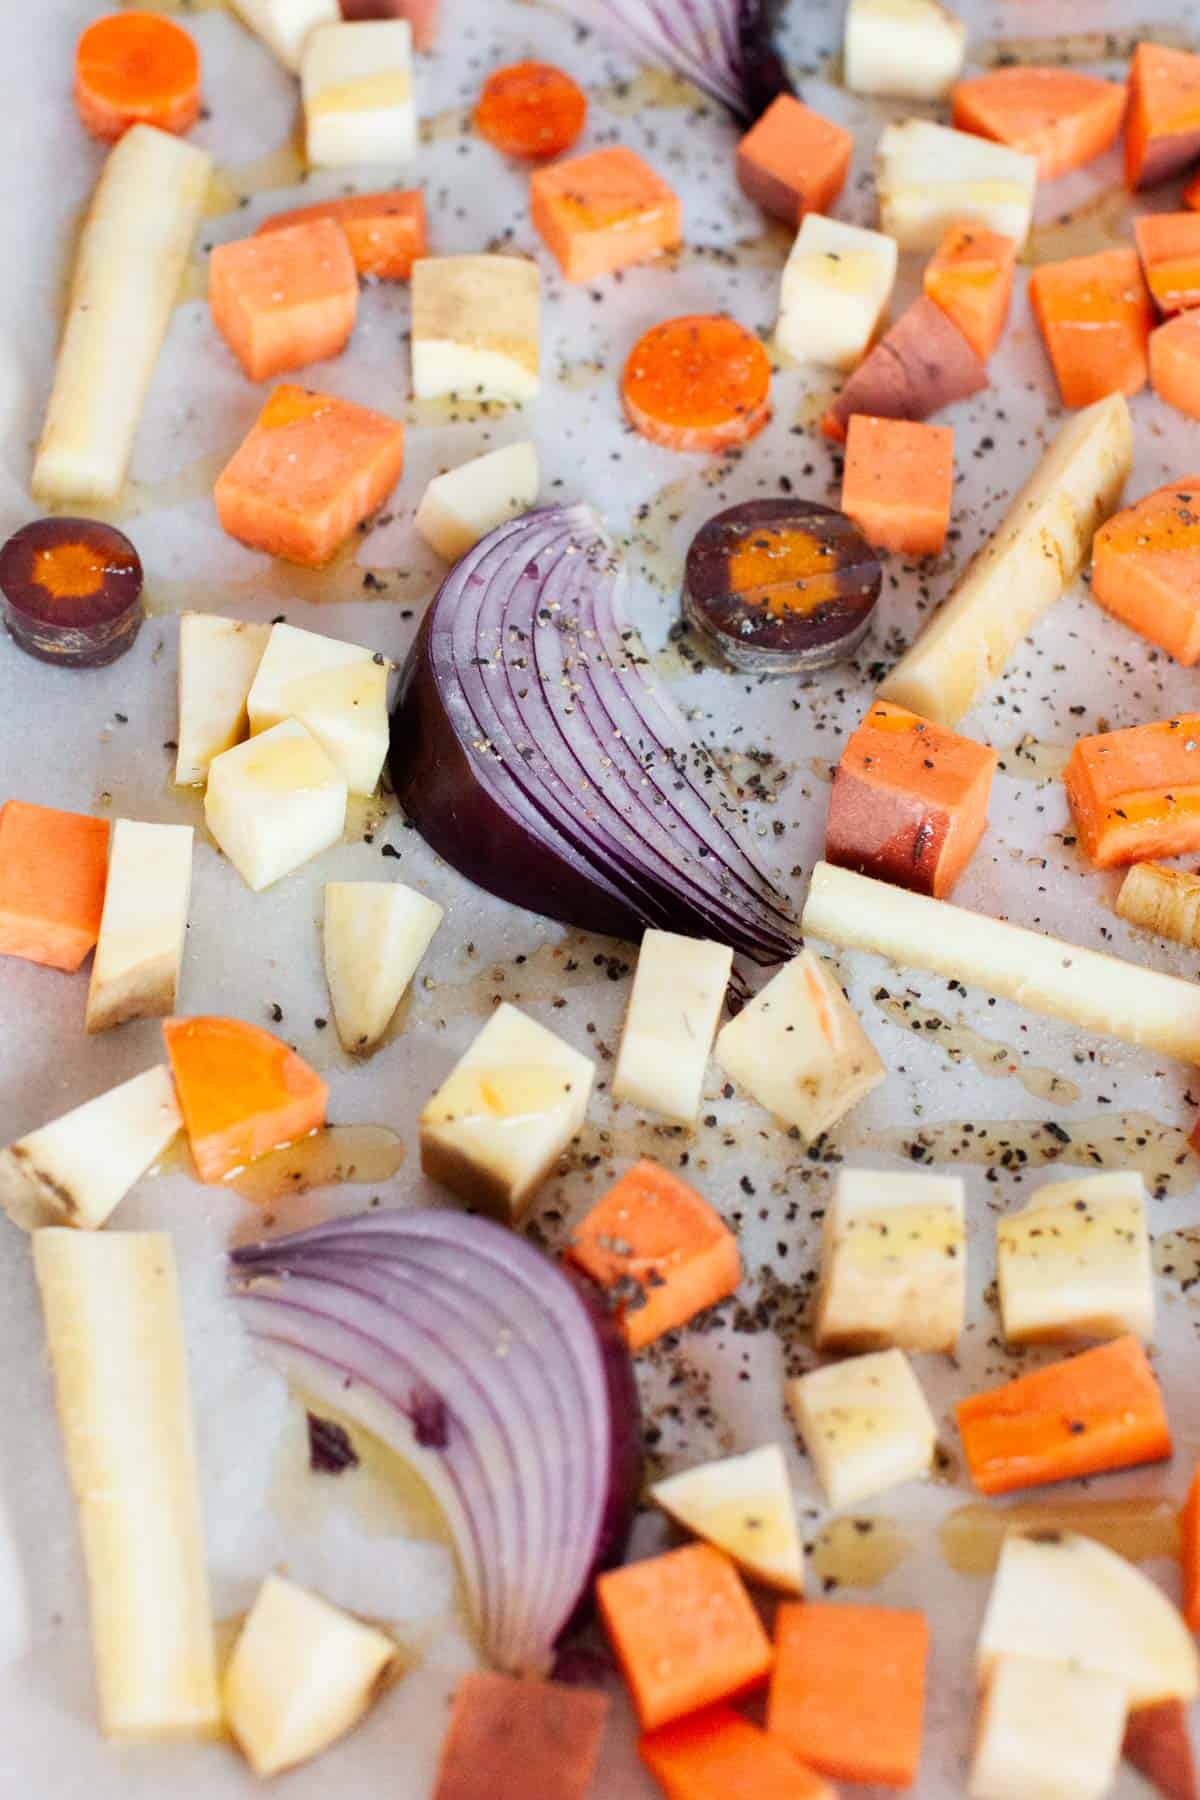 A baking sheet with red onion wedges, carrots, yams and white sweet potatoes seasoned with olive oil, salt and pepper.